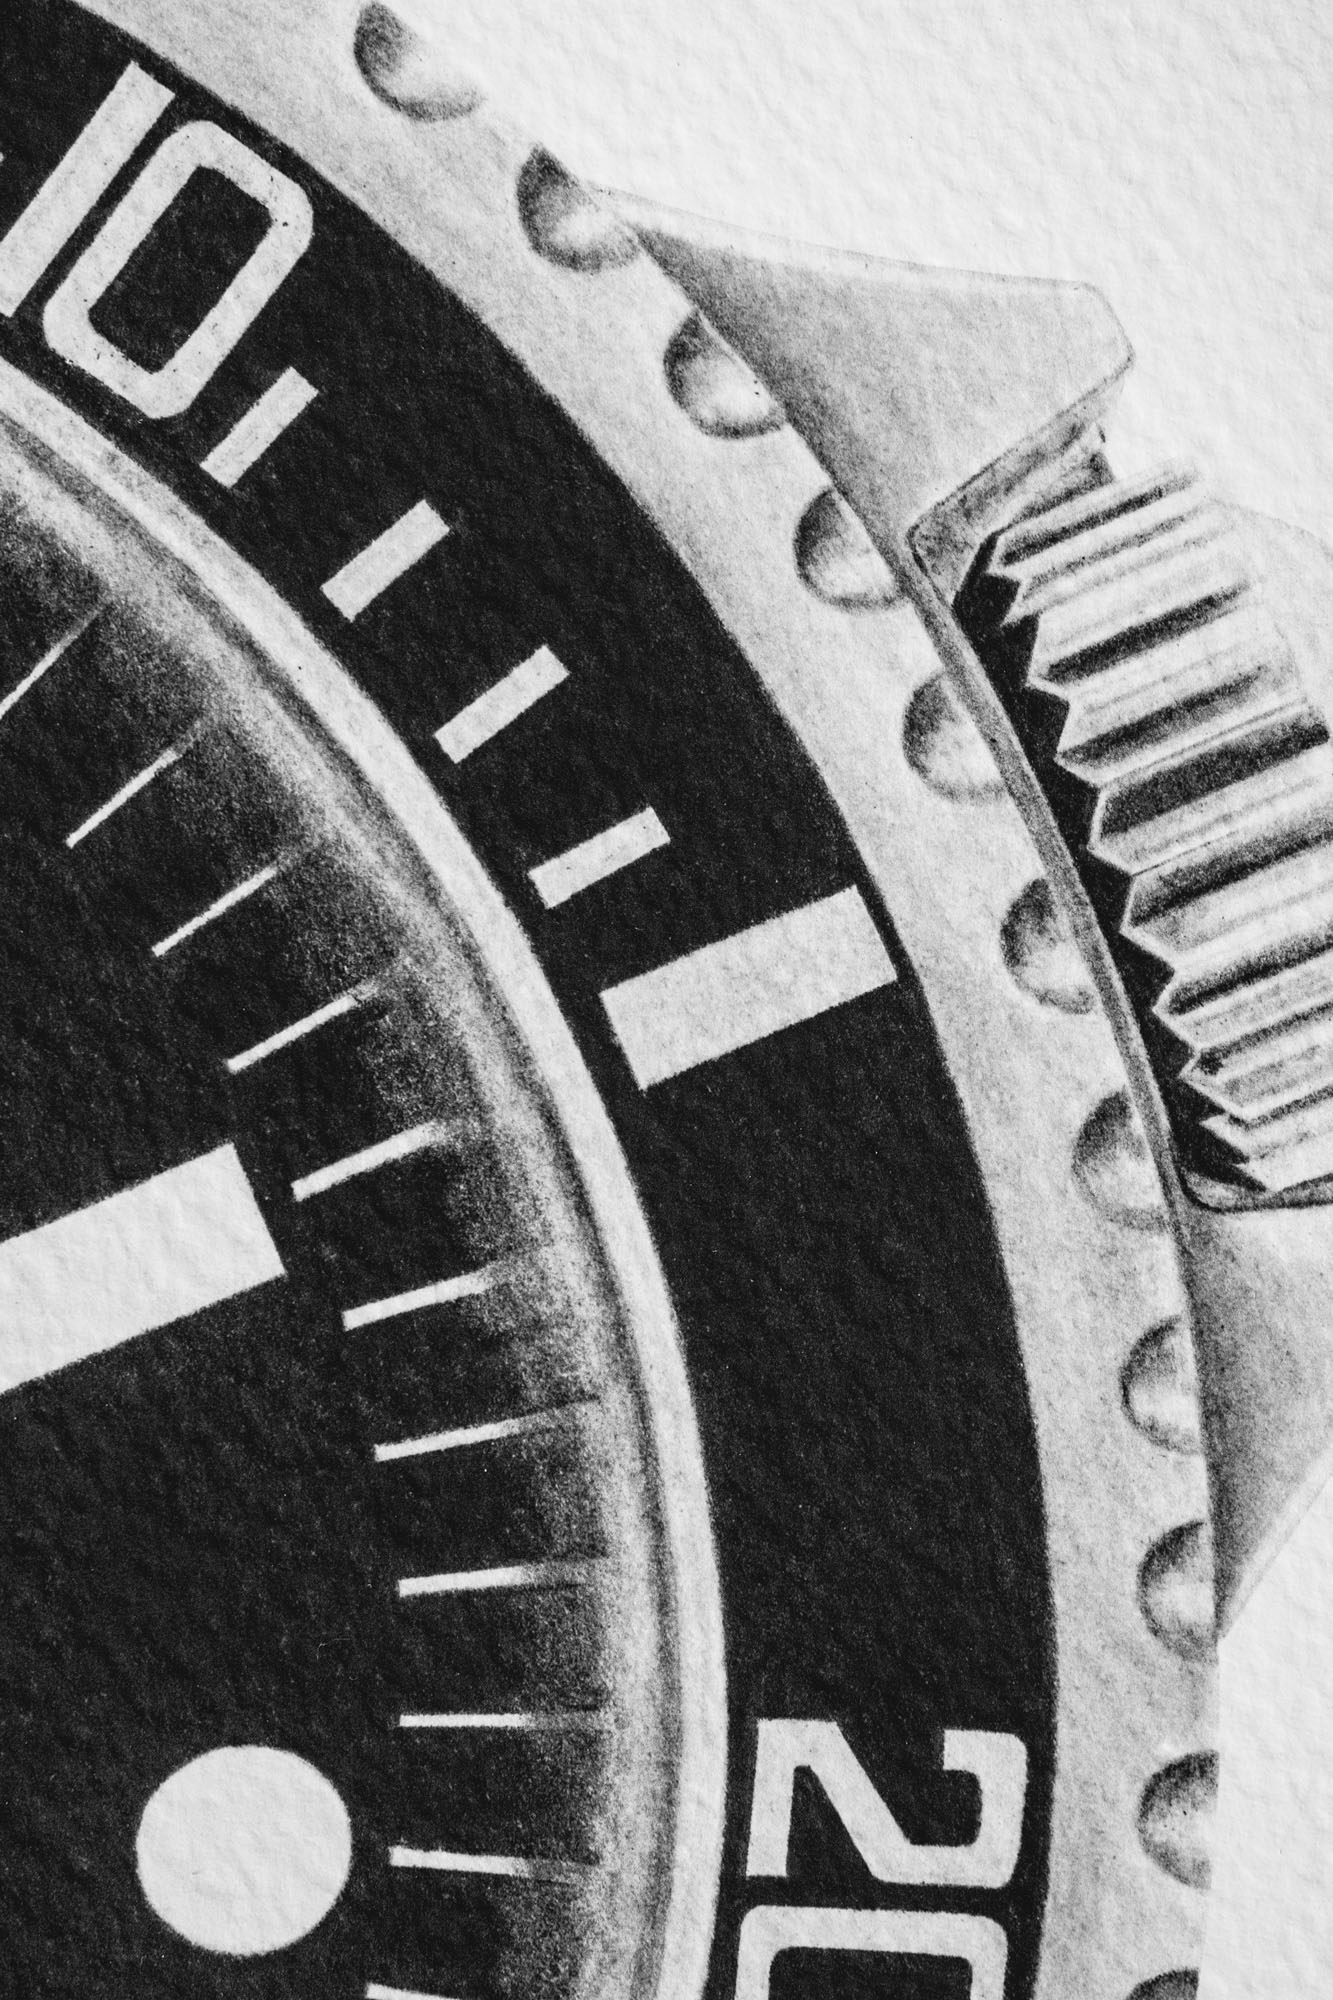 Constance Tournier Drawings - Rolex Submariner 5513 Meters First